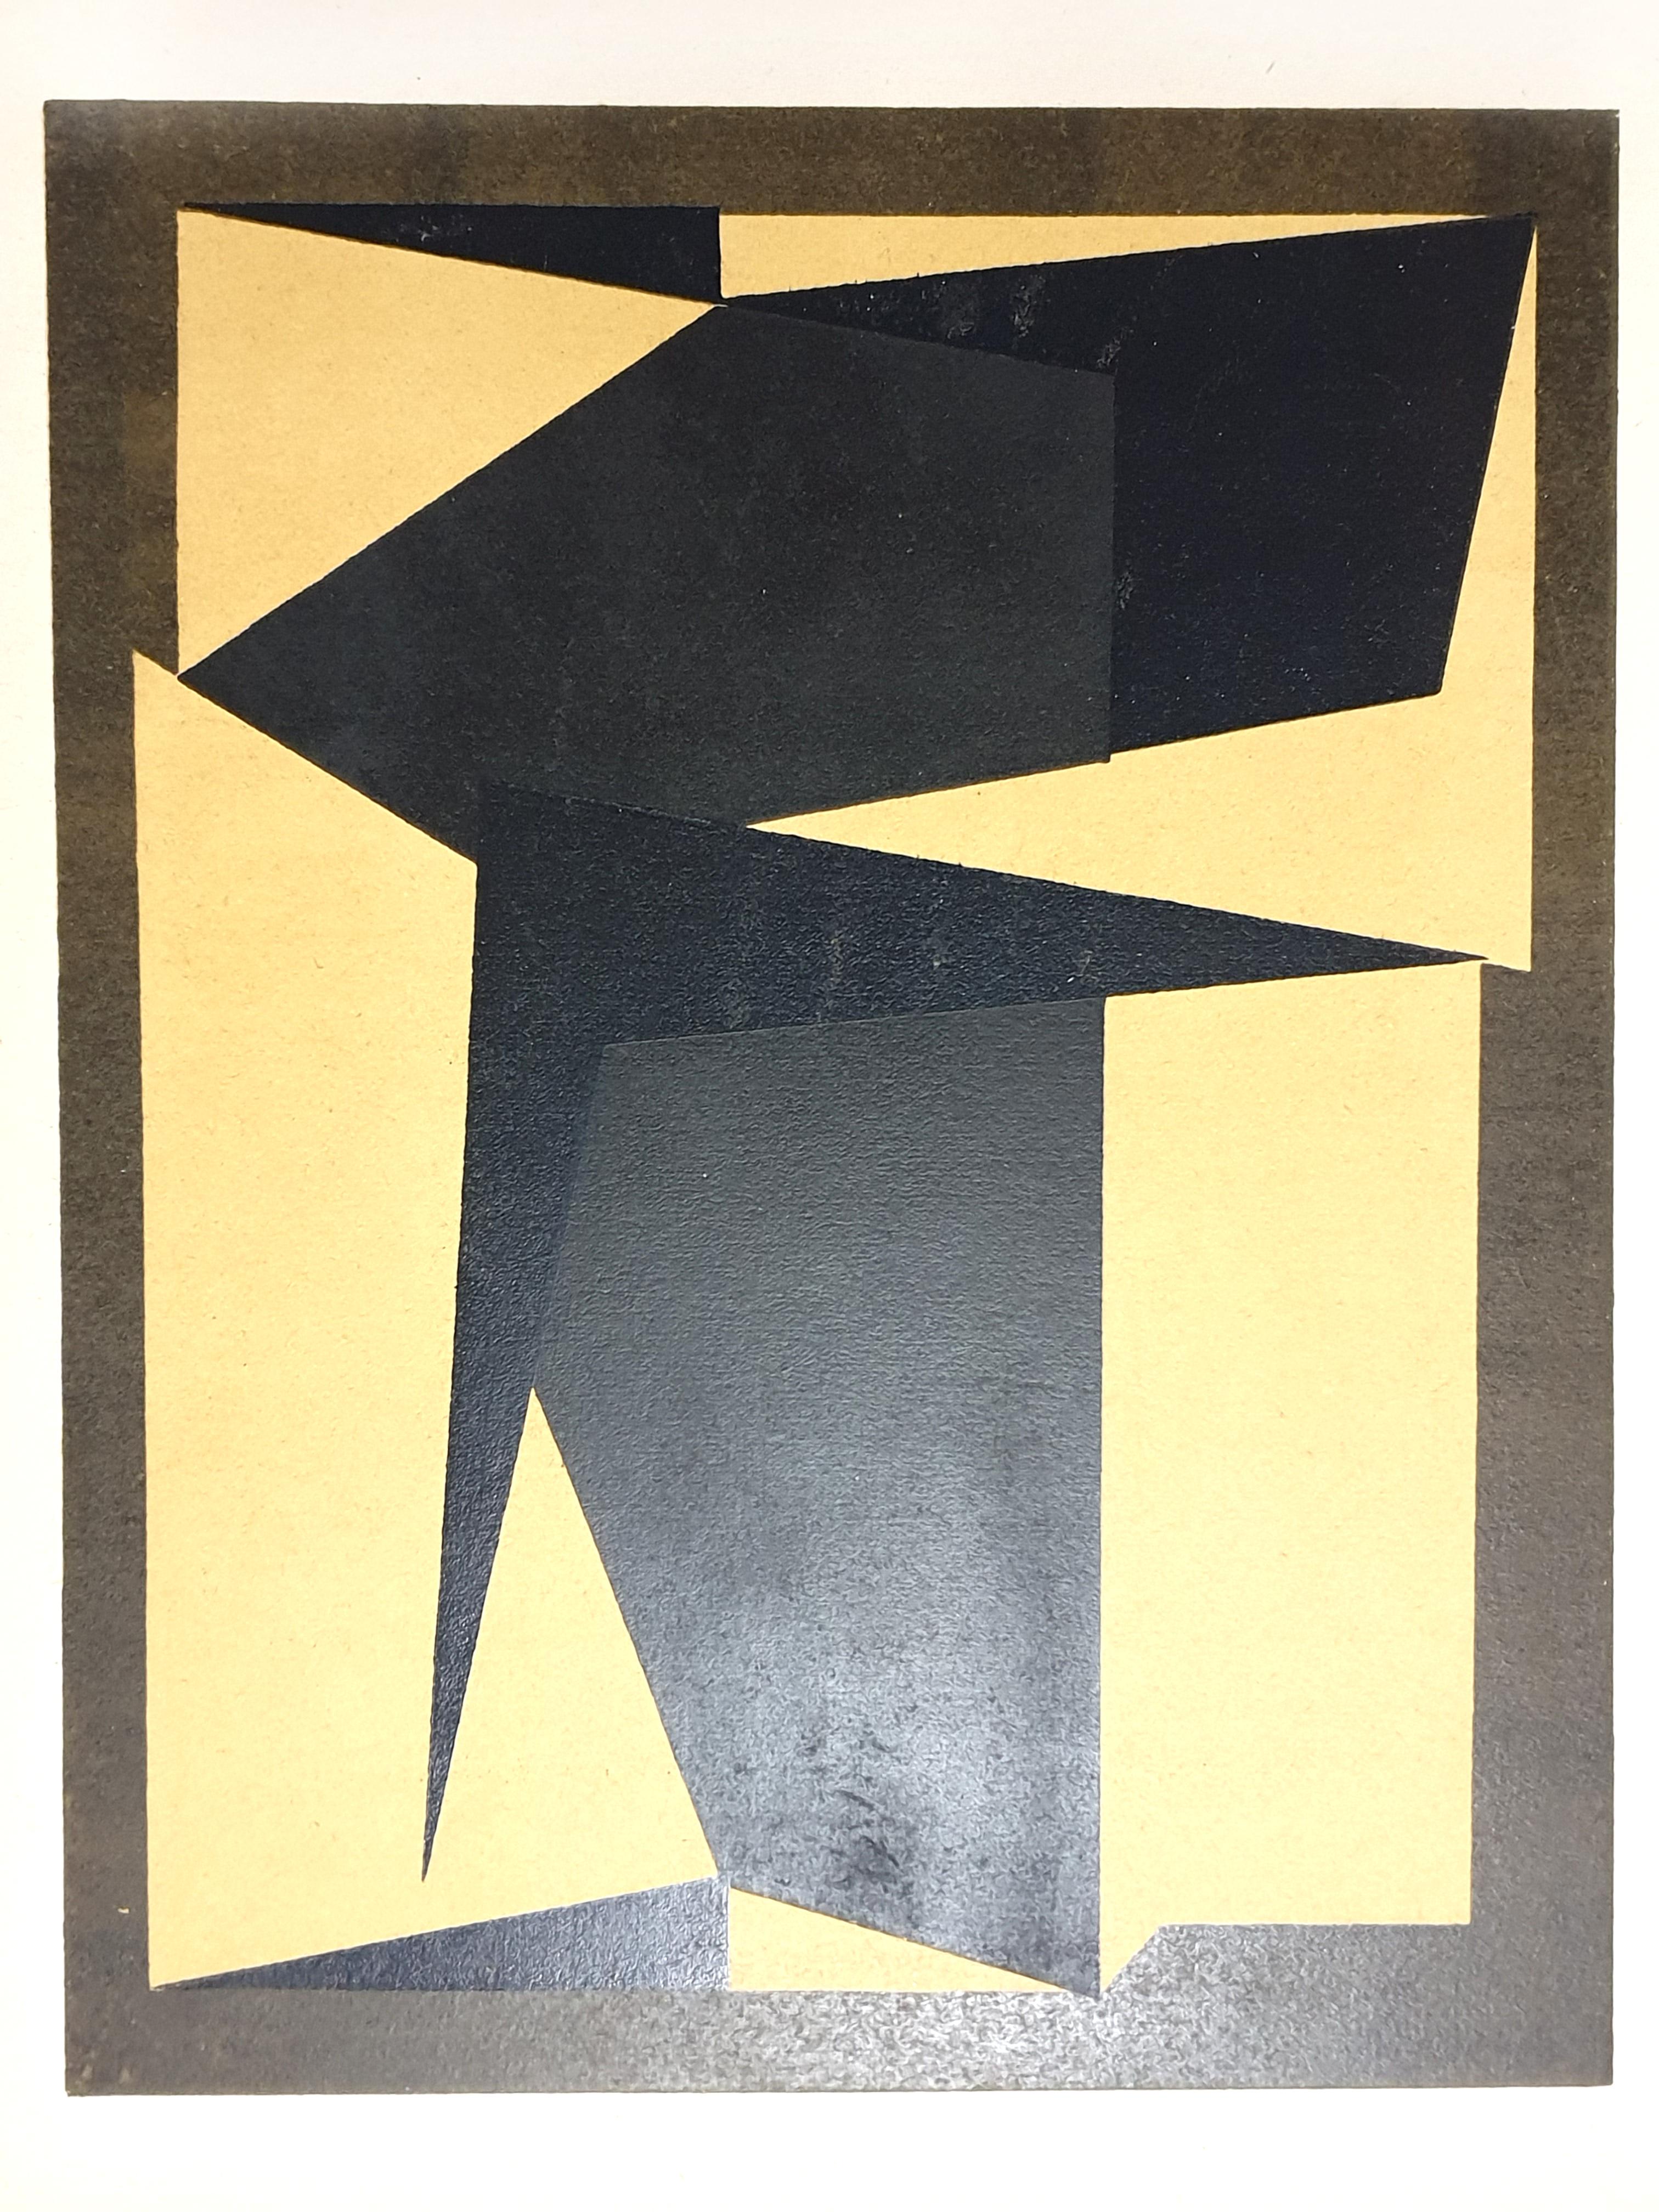 Victor Vasarely - Original Lithograph
Published in the deluxe art review, XXe Siecle
1954
Dimensions: 32 x 25 cm 
Publisher: G. di San Lazzaro.


Victor Vasarely, whose original name was Gyözö Vásárhelyi, was born in Pécs, Hungary on 9 April 1908.